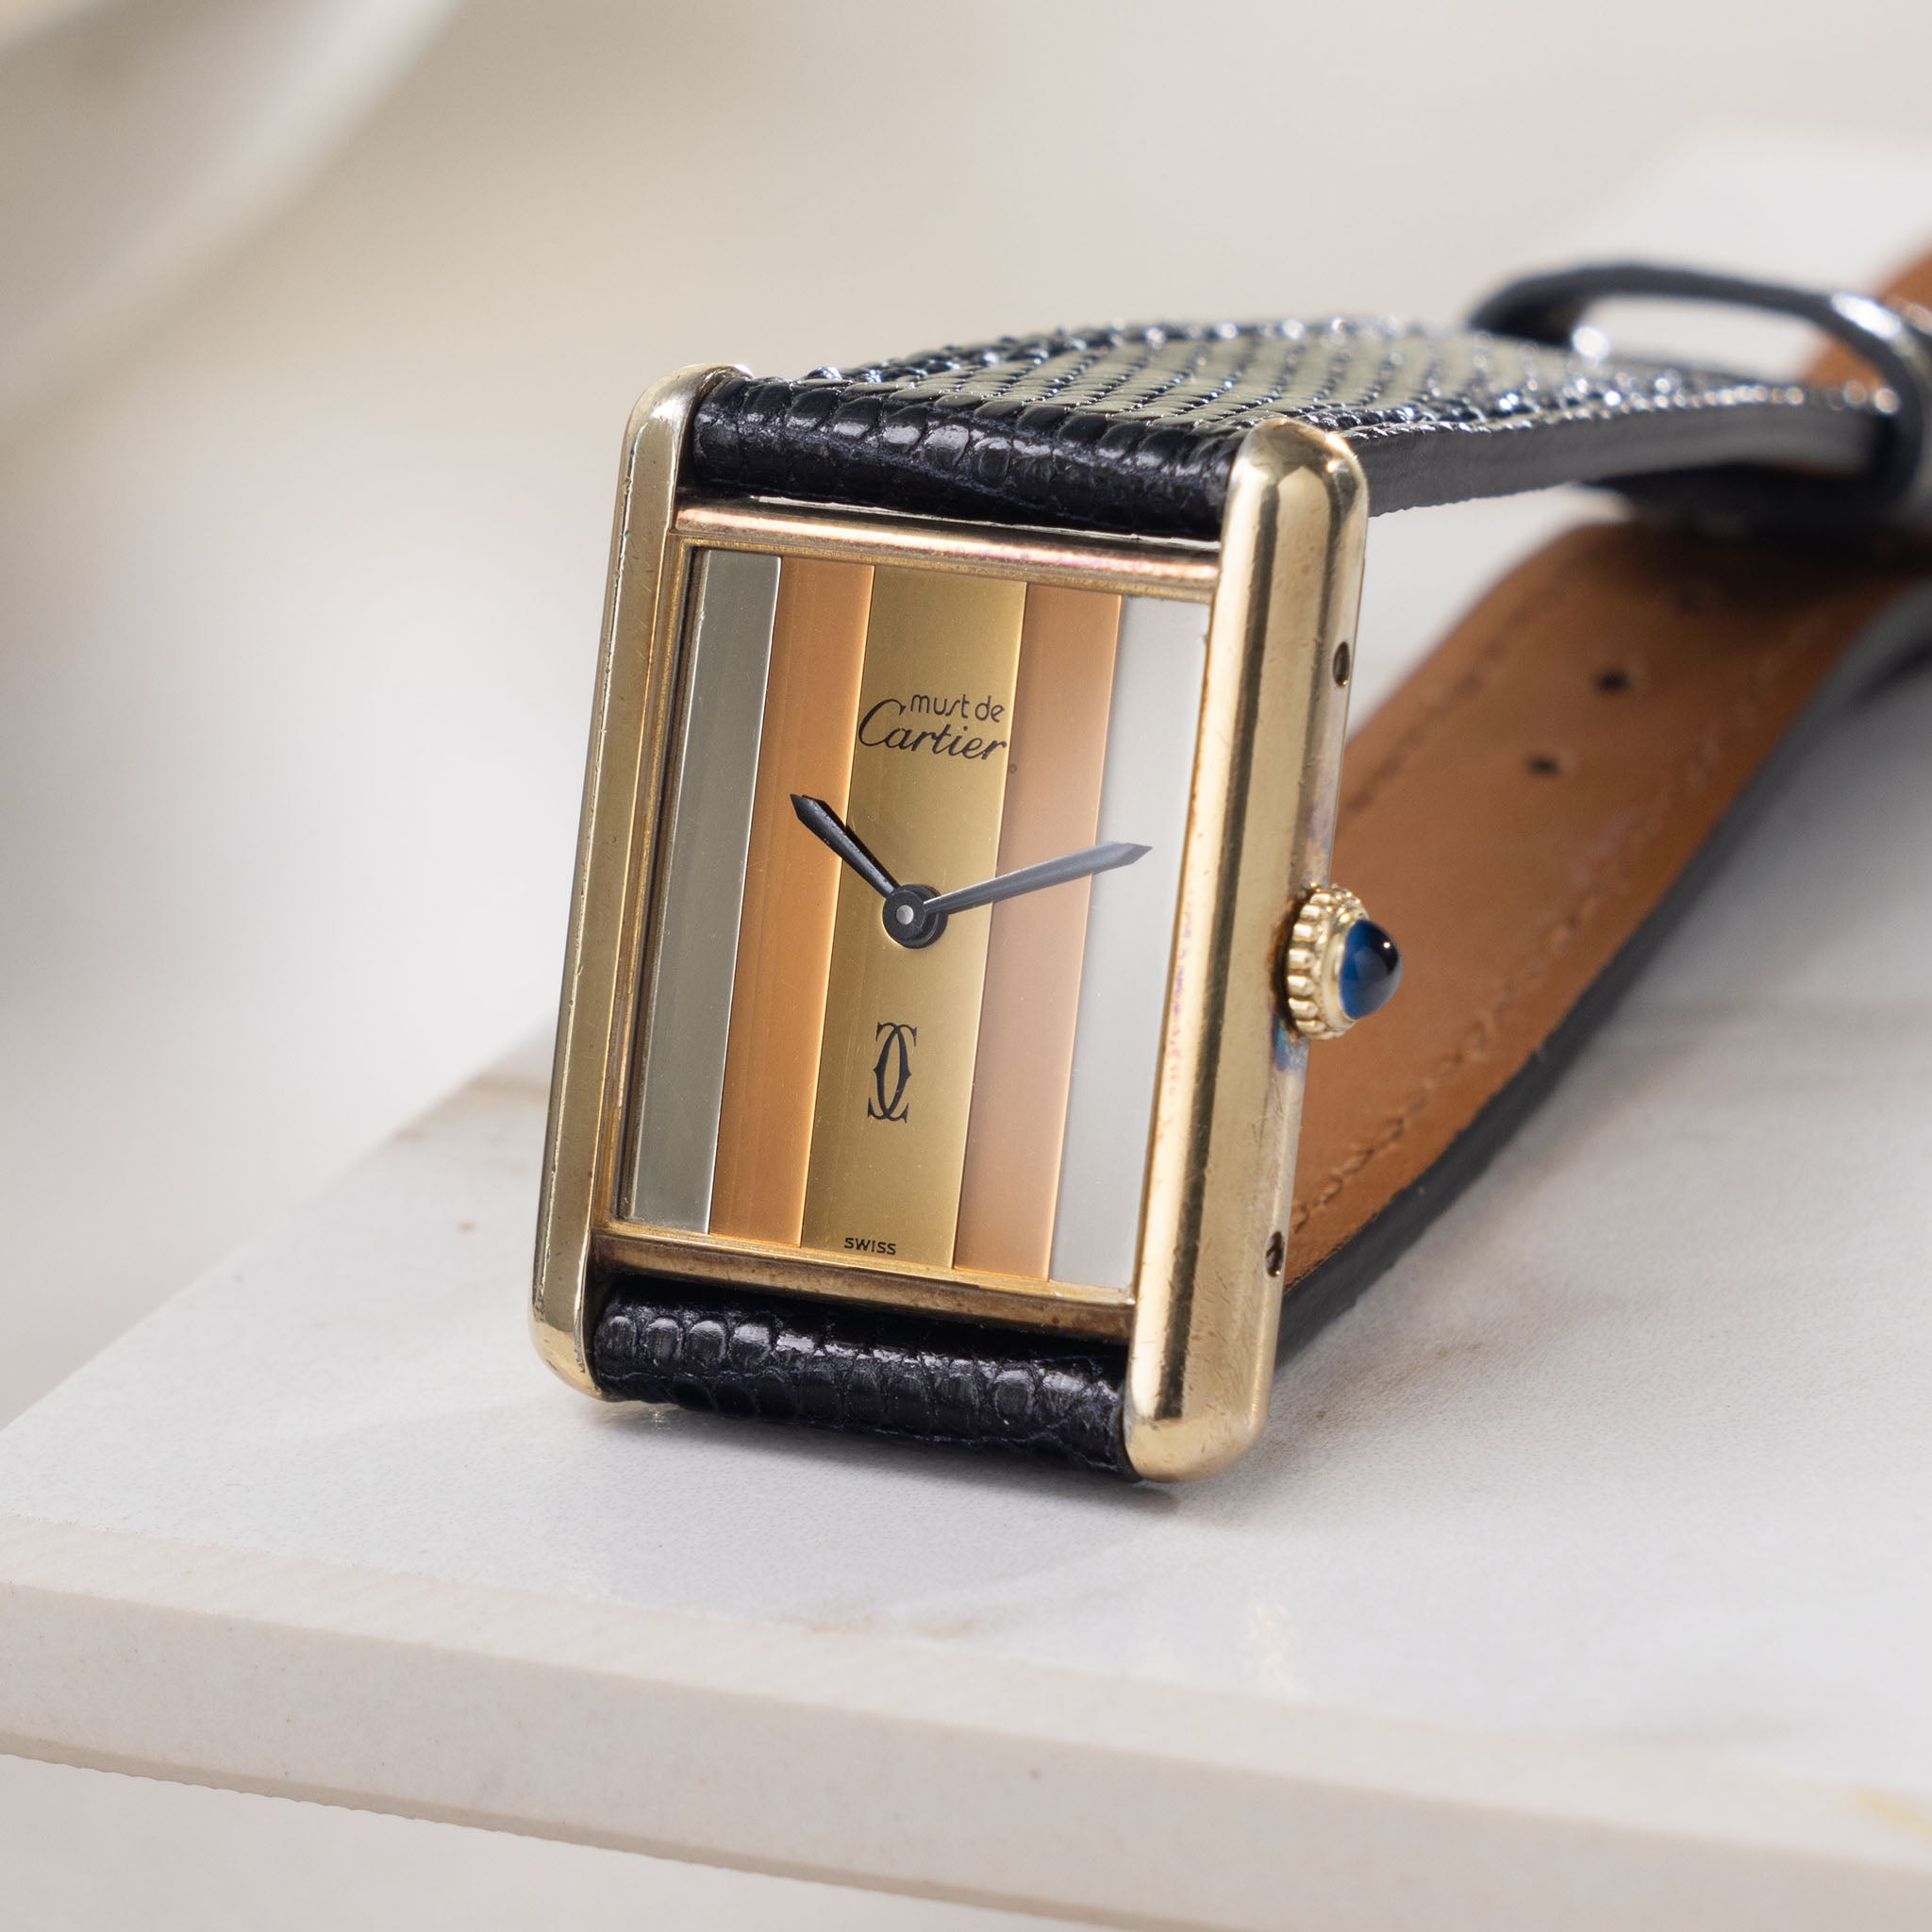 Cartier Tank Must de Cartier big size Trinity dial with box and guarantee card handwound